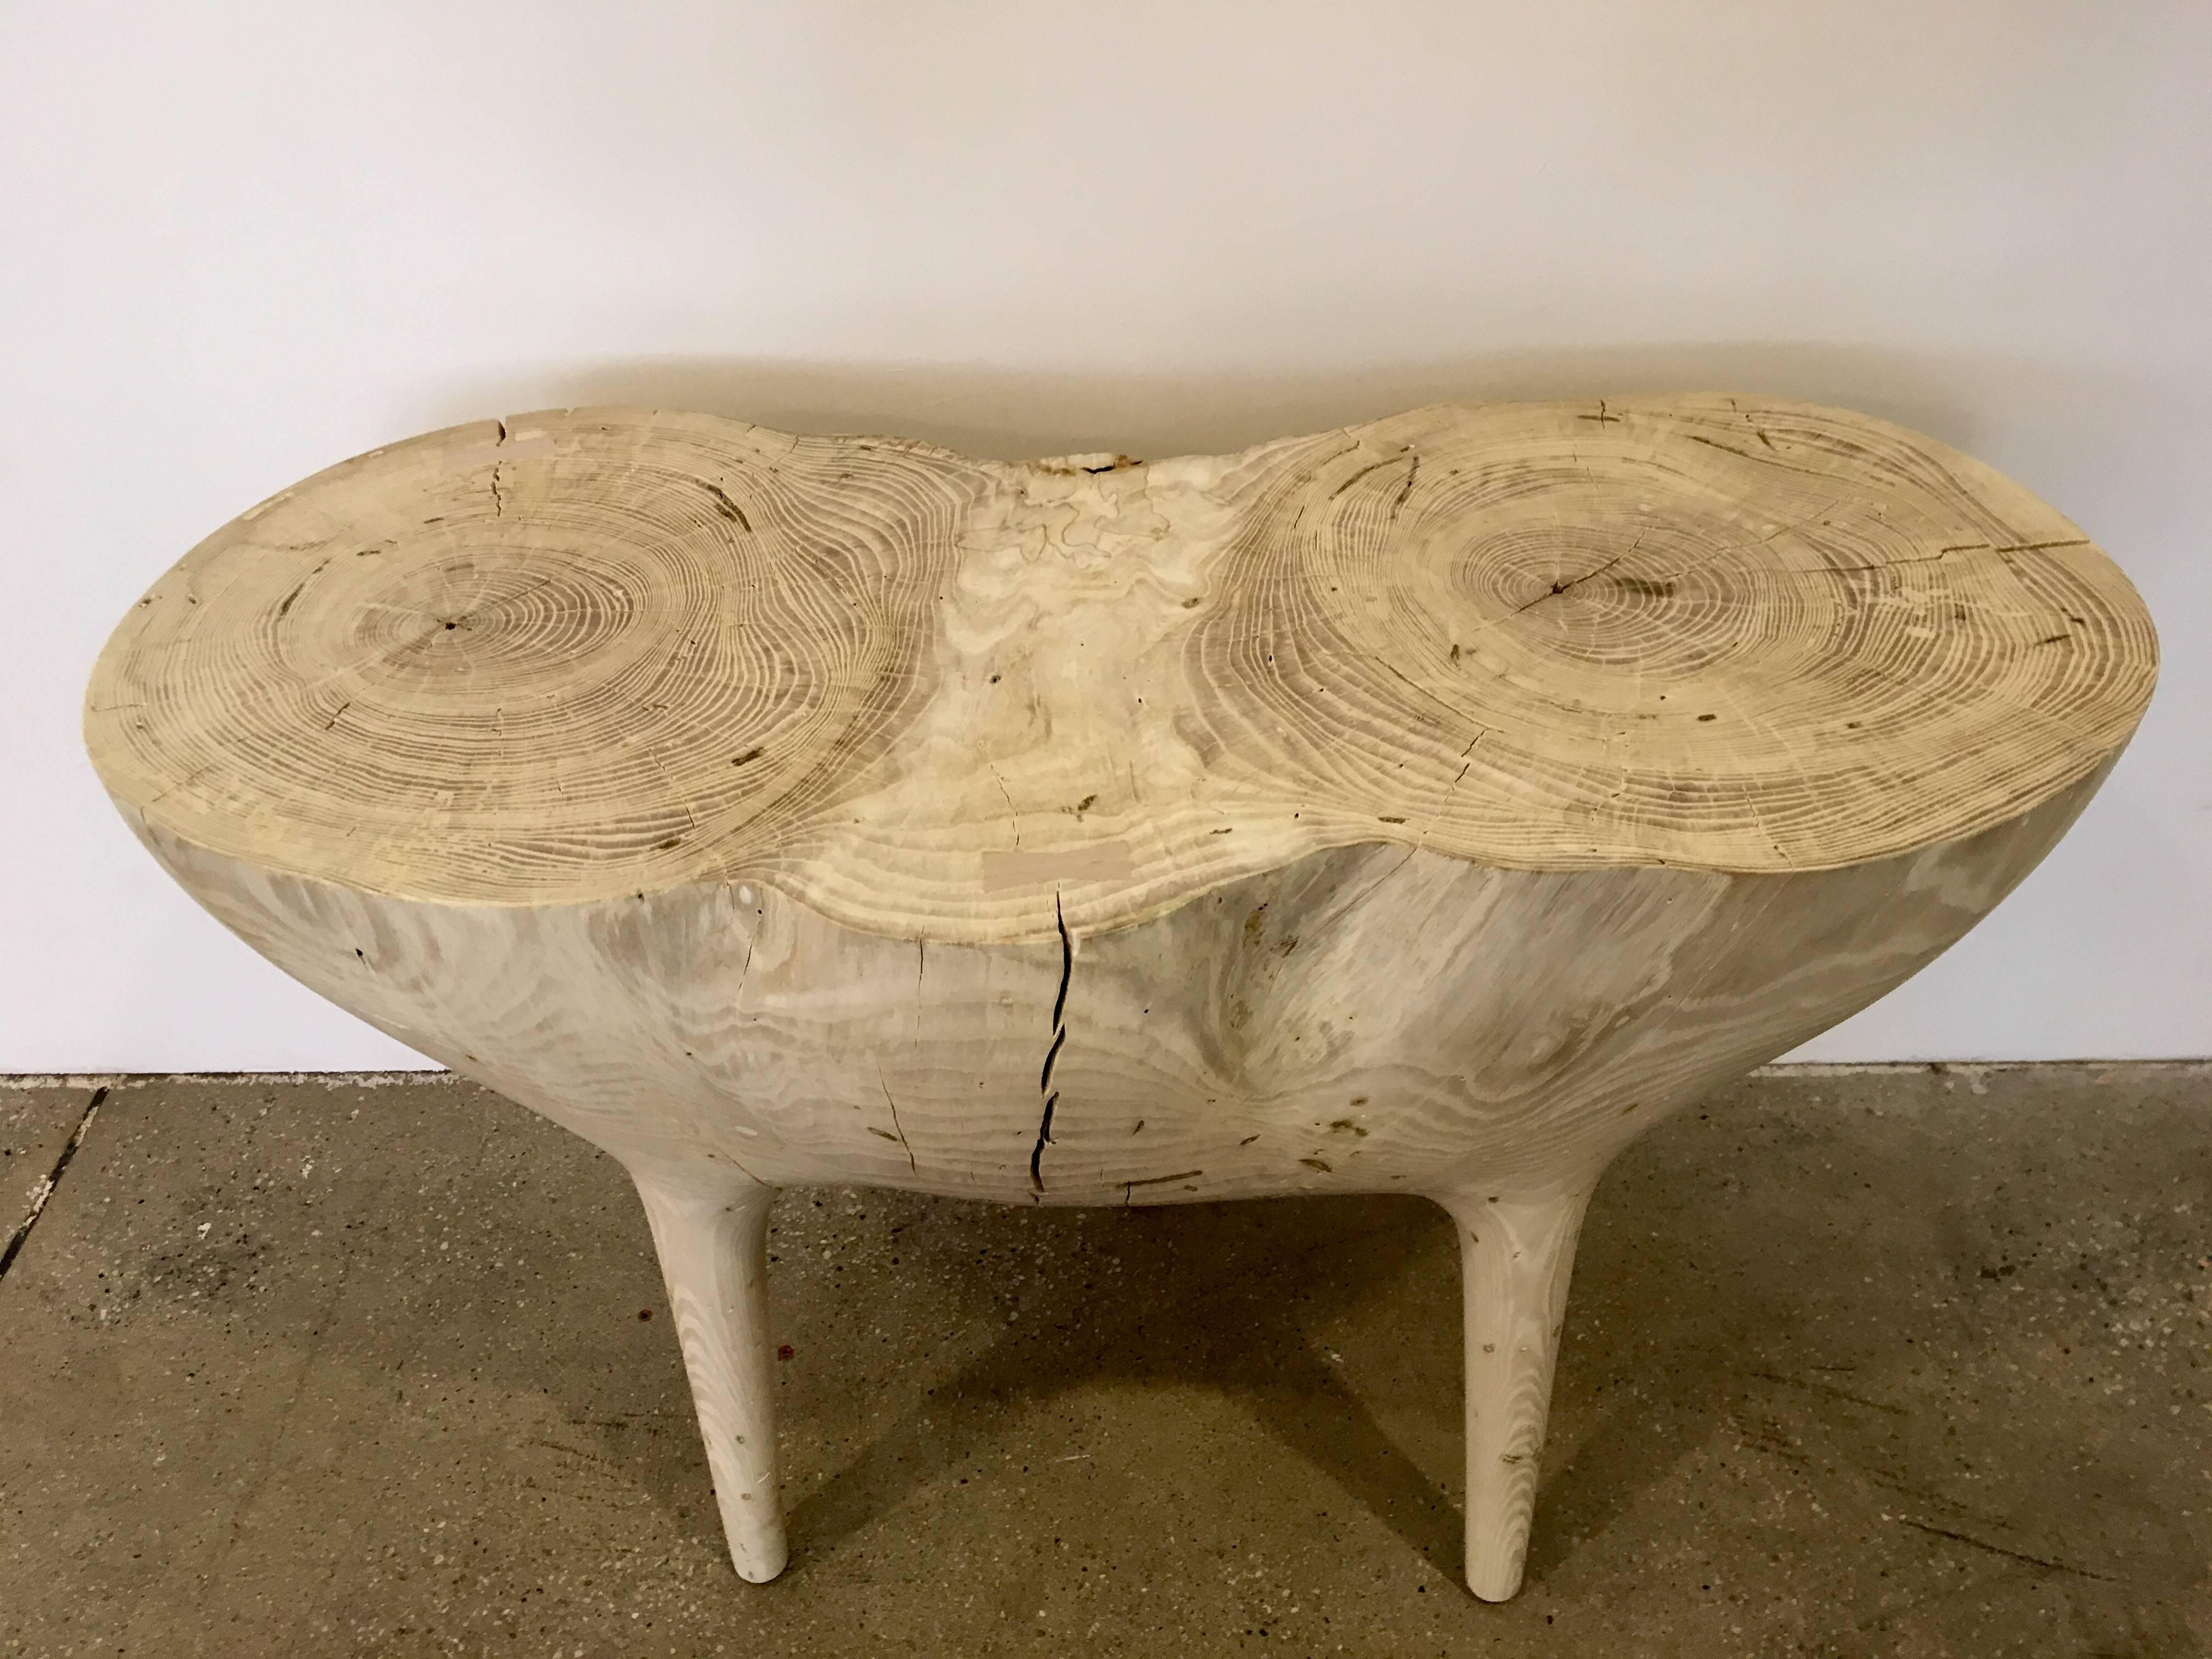 Unique hand-carved side table by Caleb Woodard, made of bleached ash.
Organic form supported by three long legs.
Great presence and style.